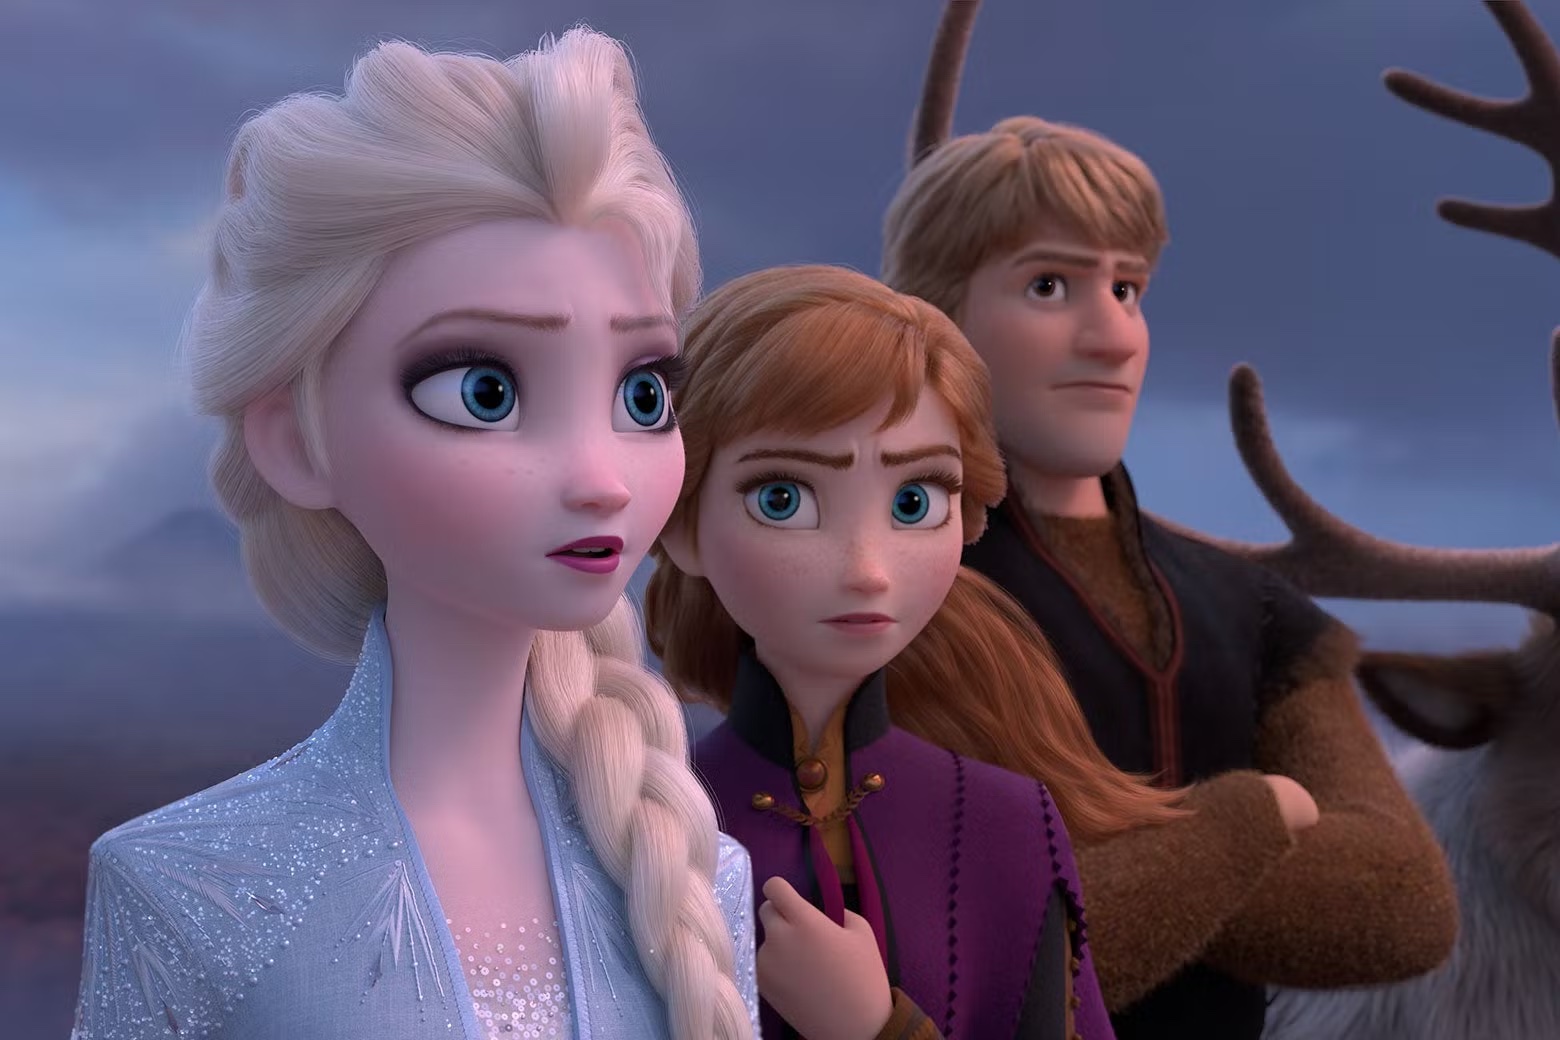 Still from Frozen 2 that includes Elsa, Anna and Kristoff